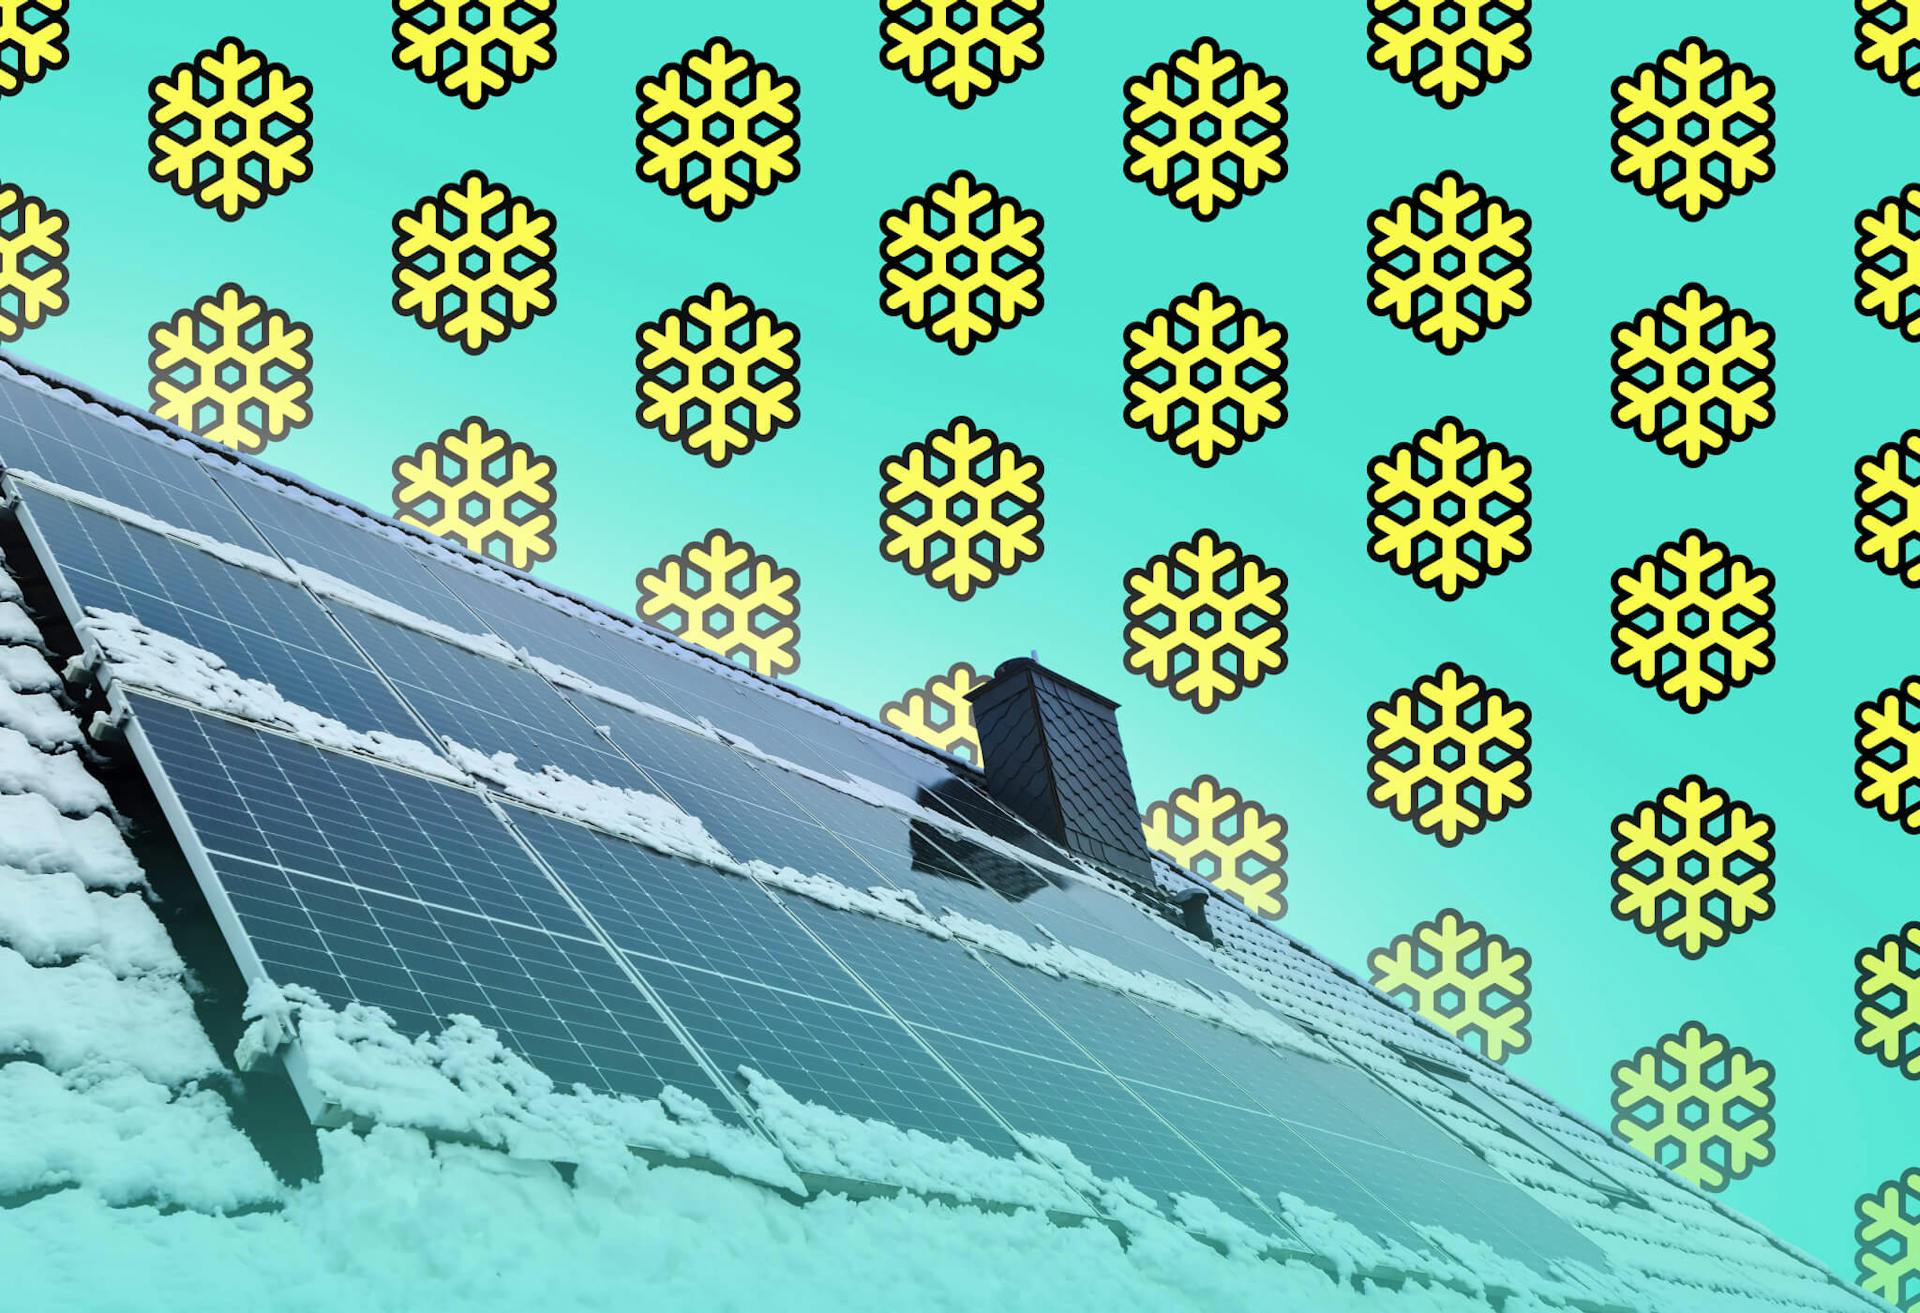 Snow on a rooftop solar panel system, yellow cartoon snowflakes in the background